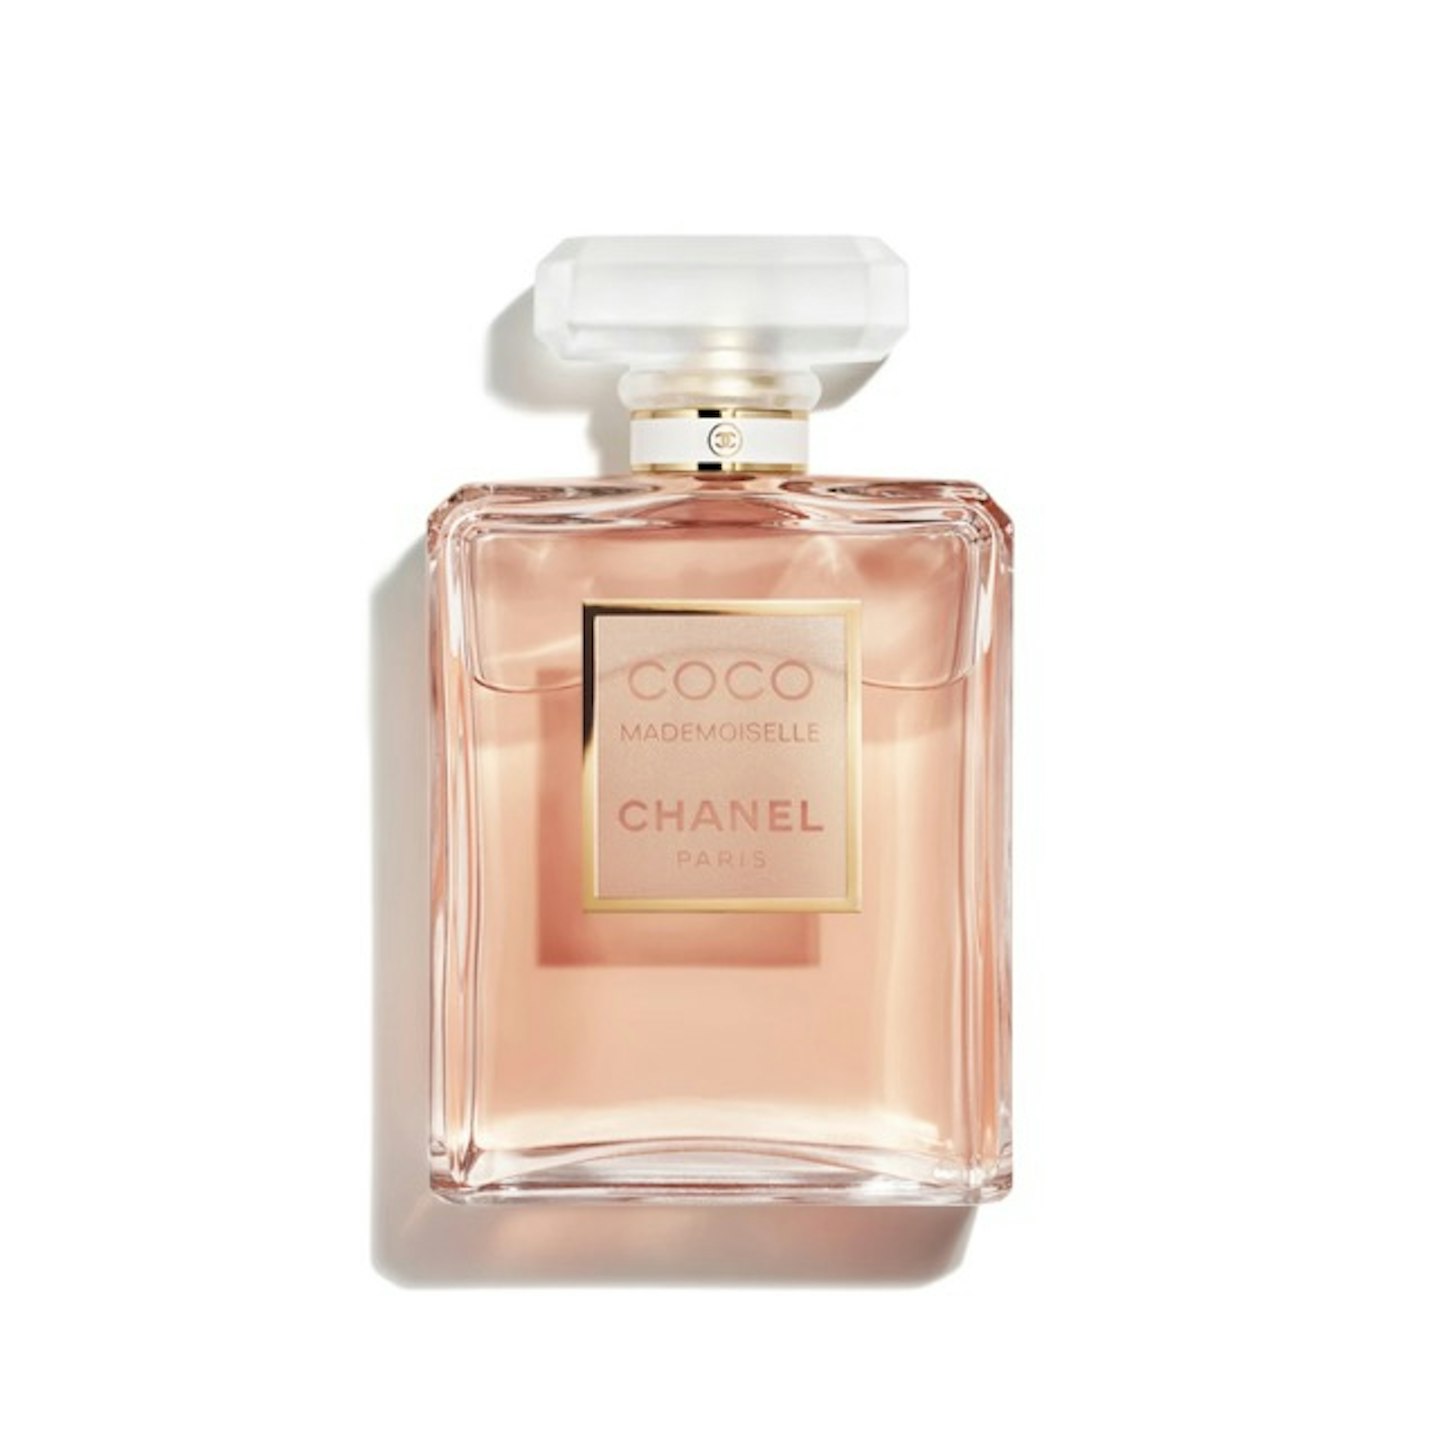 Chanel Reveal The New Face Of Coco Mademoiselle